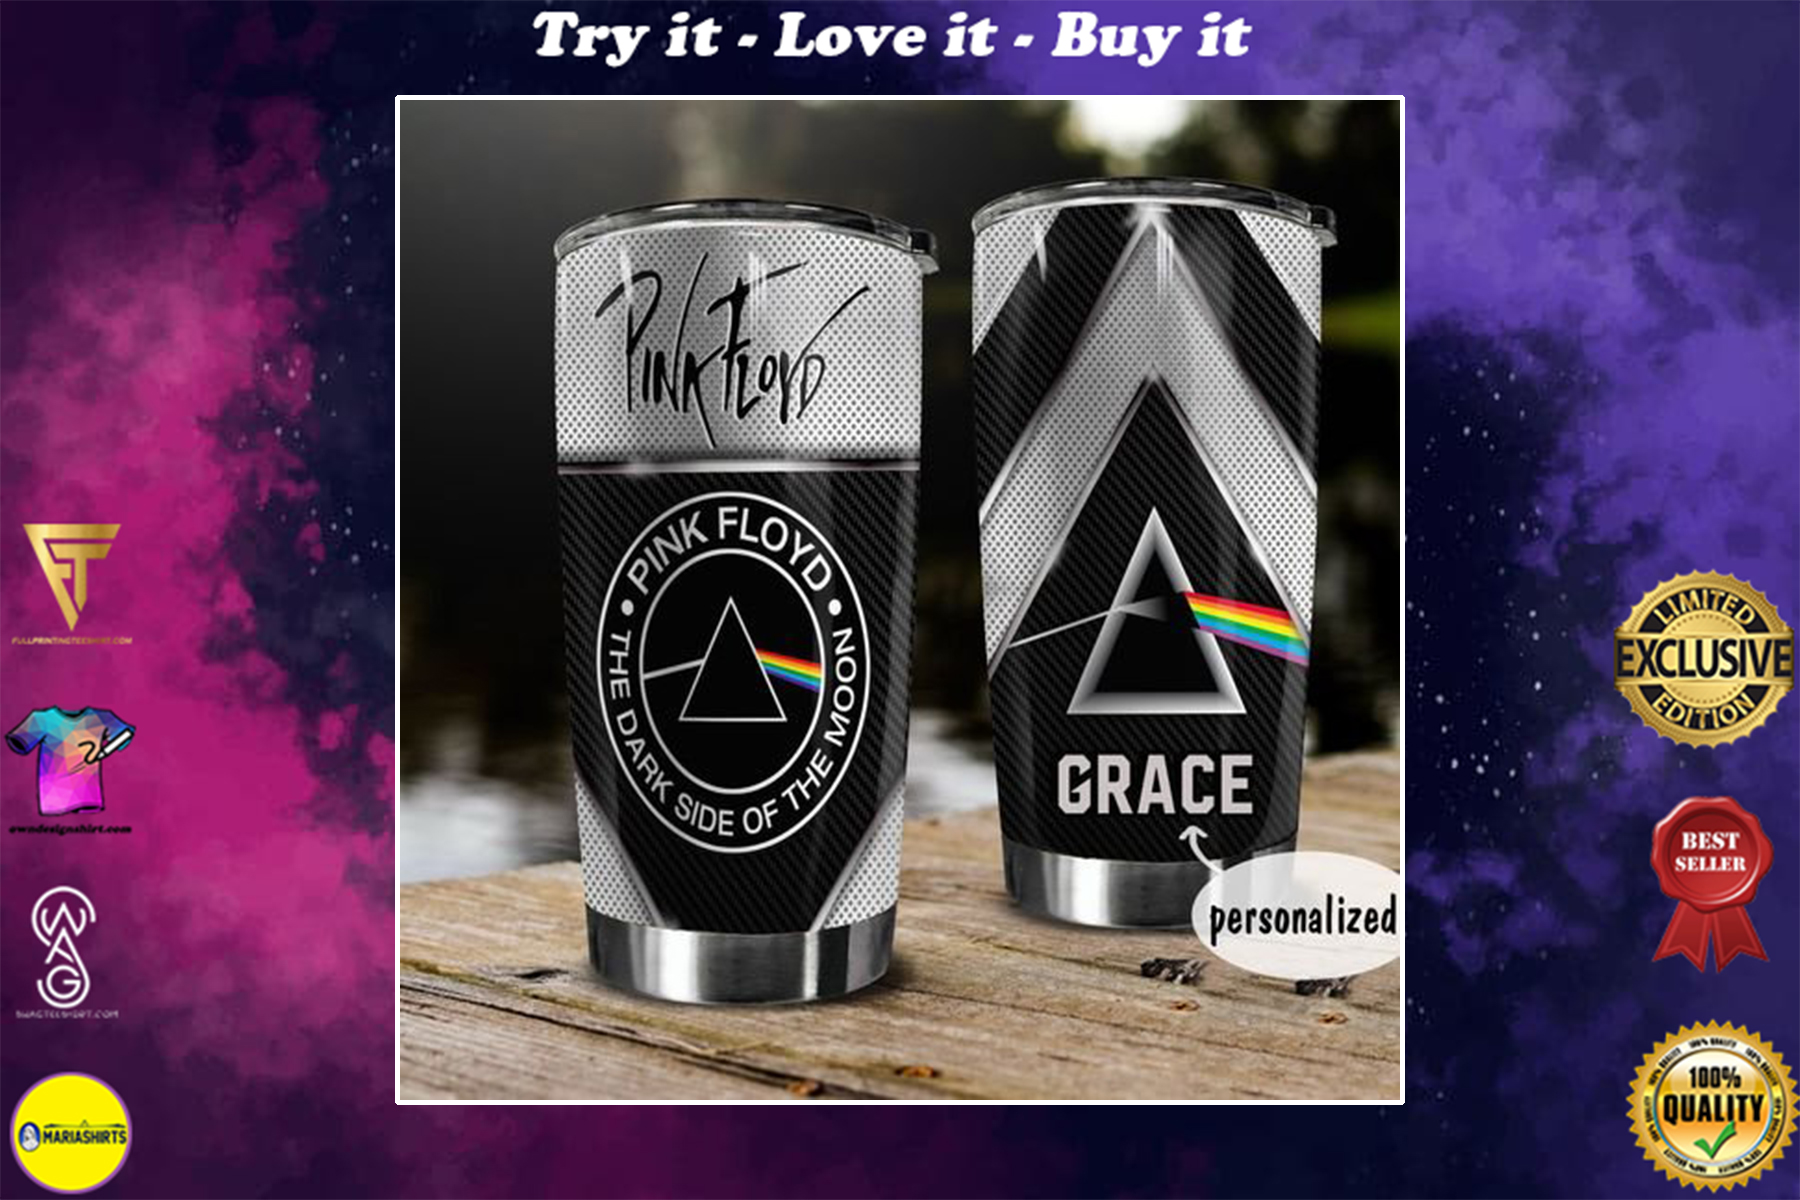 personalized name pink floyd the dark side of the moon tumbler